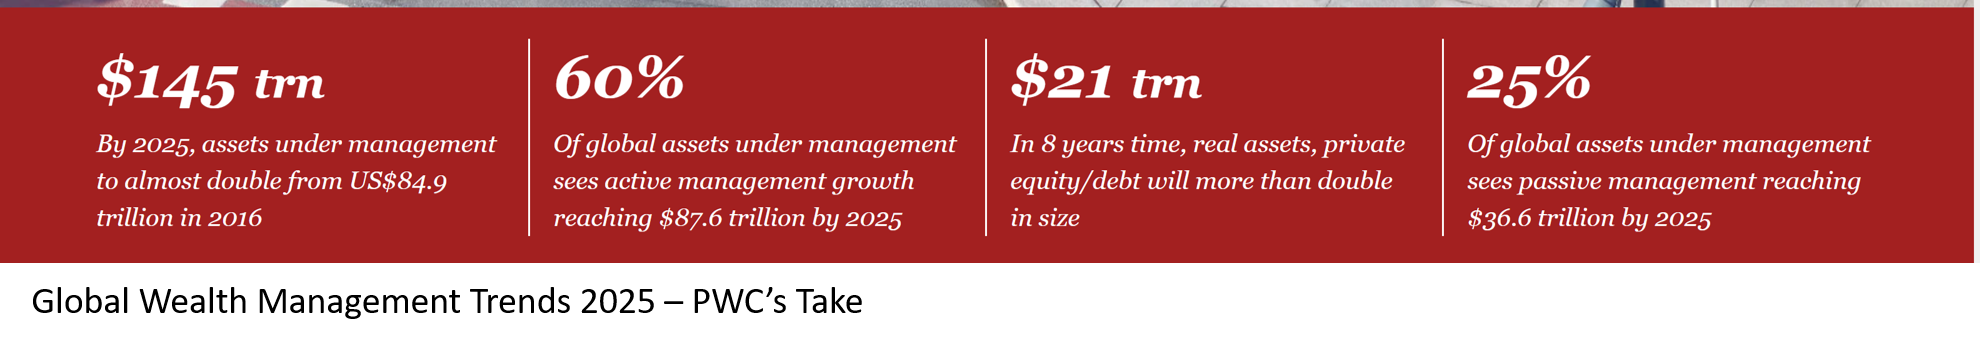 Wealth Management Trends 2025 - PWCs take